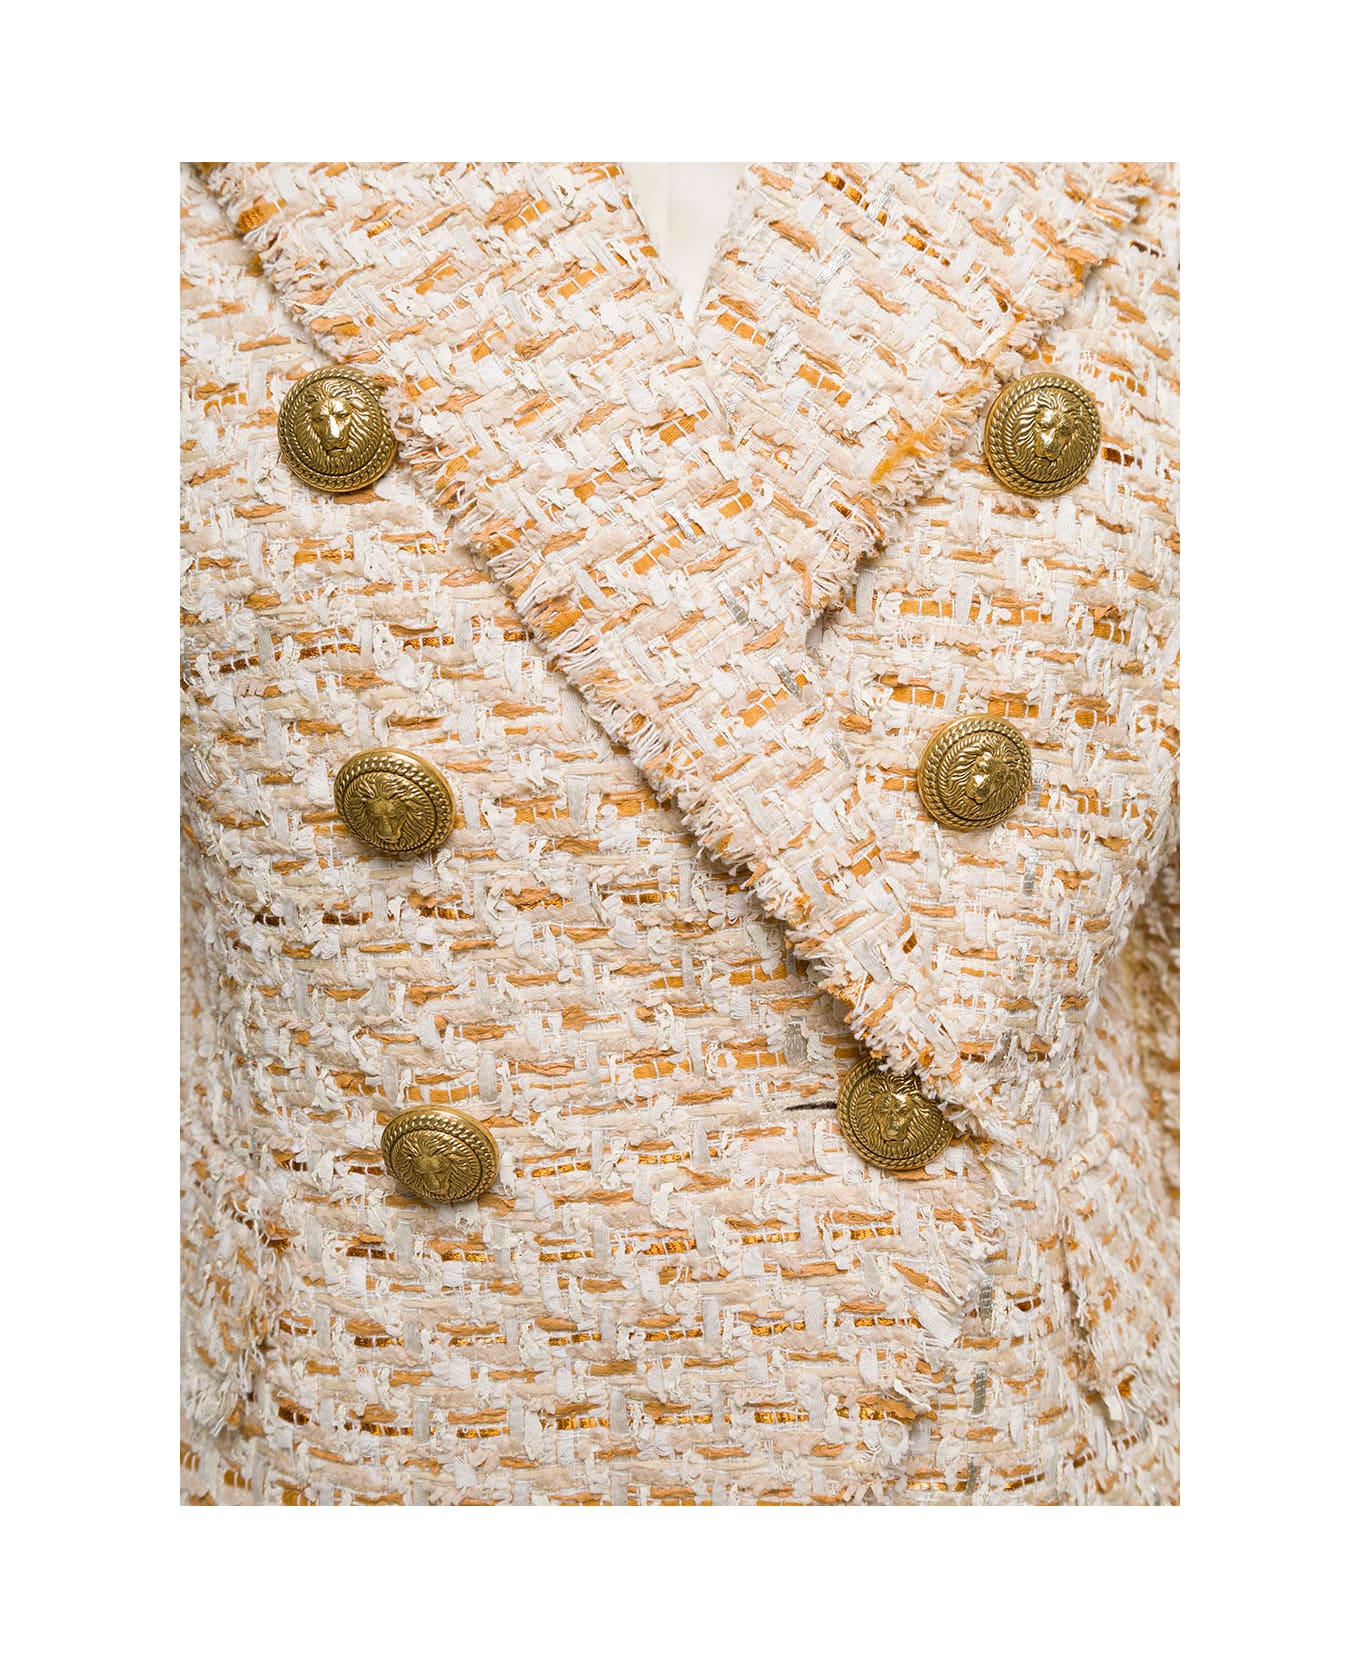 Balmain Beige Double-breasted Jacket With Gold-colored Branded Buttons In Tweed Woman - Beige